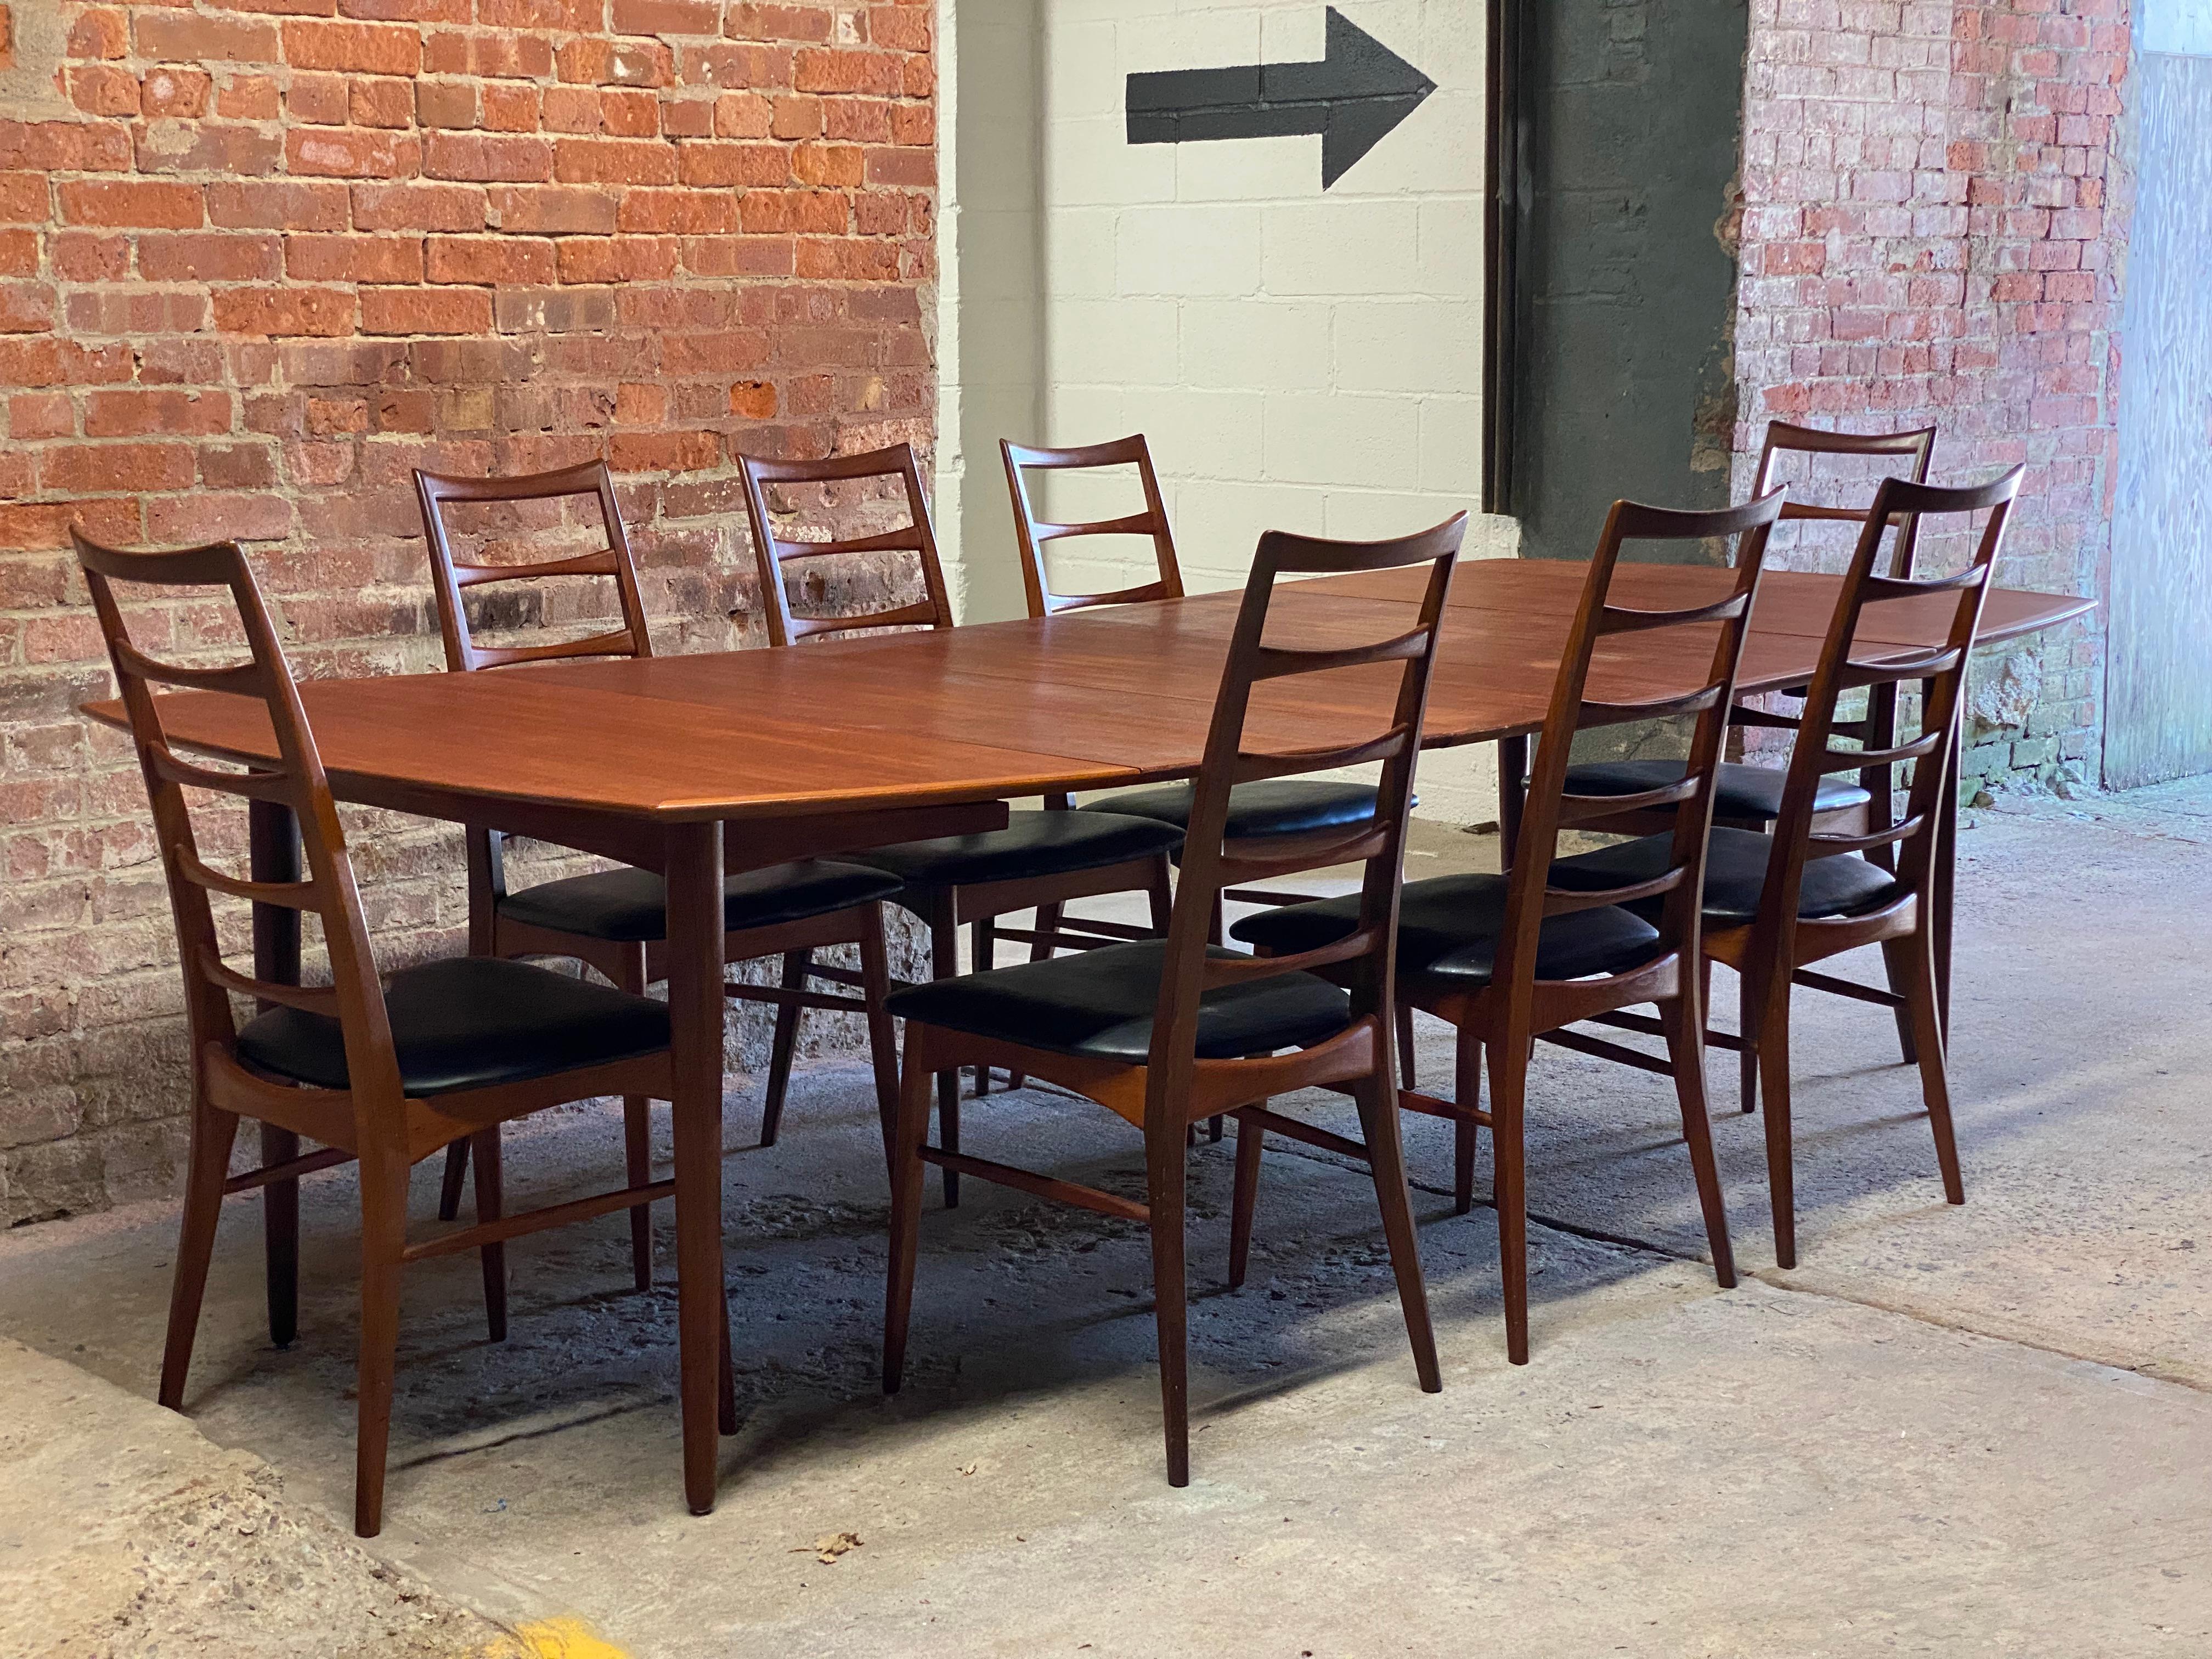 Kofoed Hornslet teak dining table and eight (8) dining chairs. Originally purchased at Bloomingdale's. The dining table can be used with no leaves, one, two or three. Featuring a banded edge, nicely figured teak top veneers, a nice arching accent